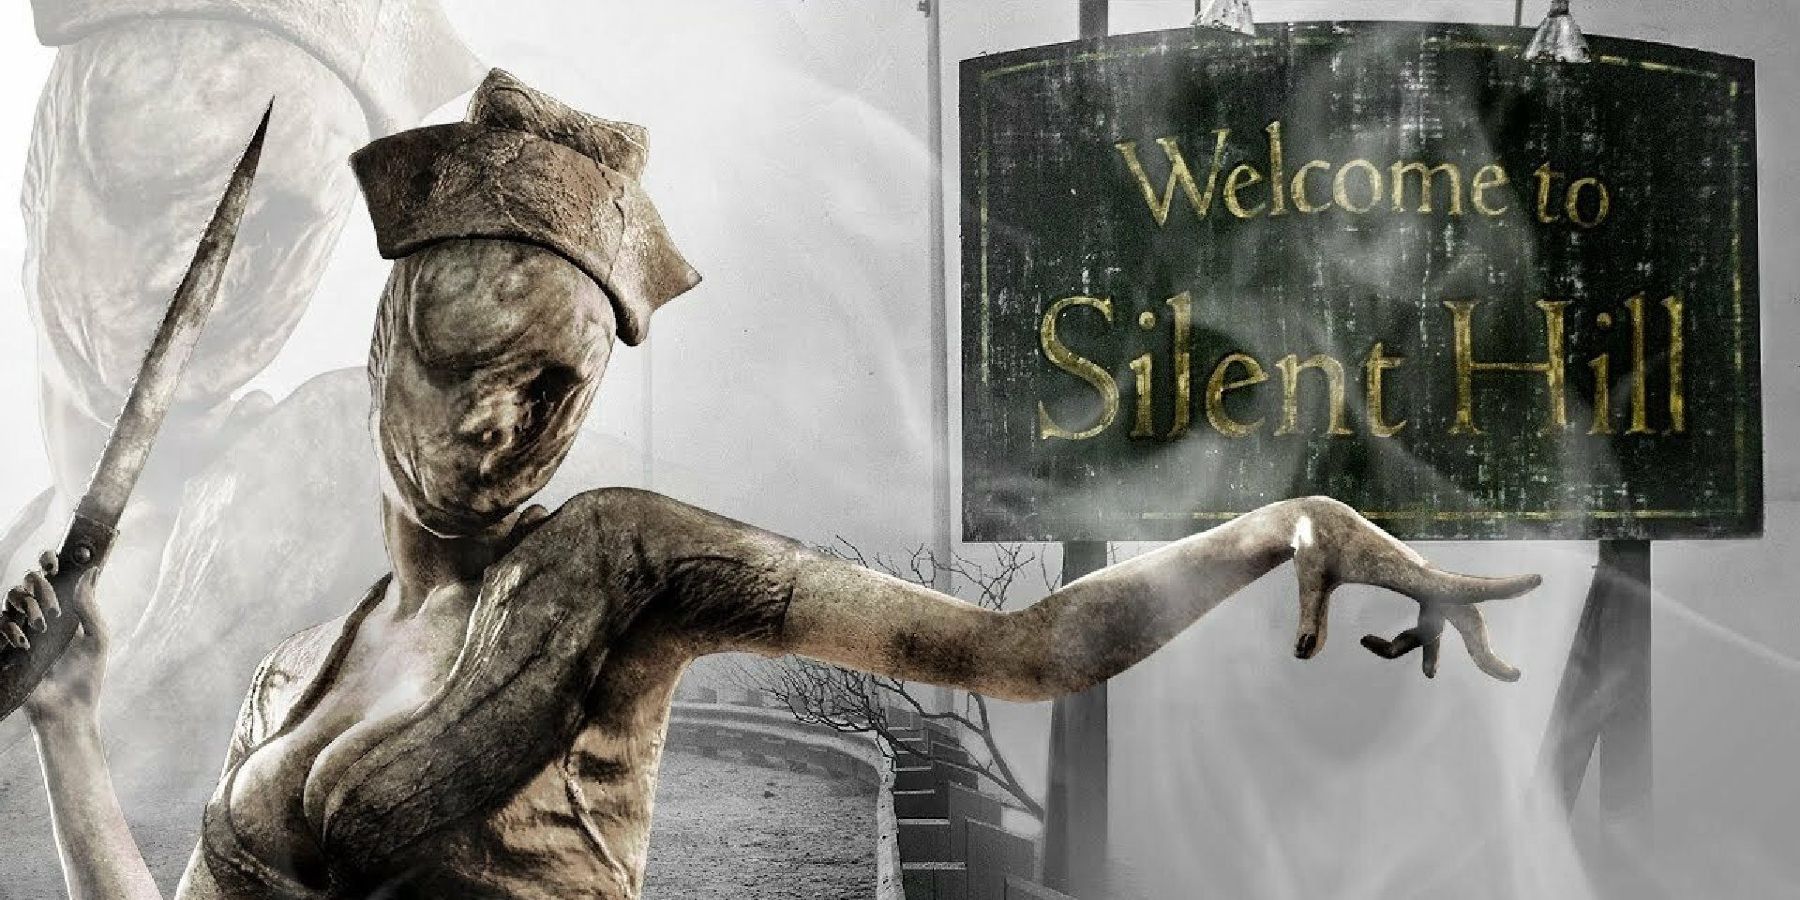 Image from Silent Hill showing a nurse in front of the town's welcome sign.